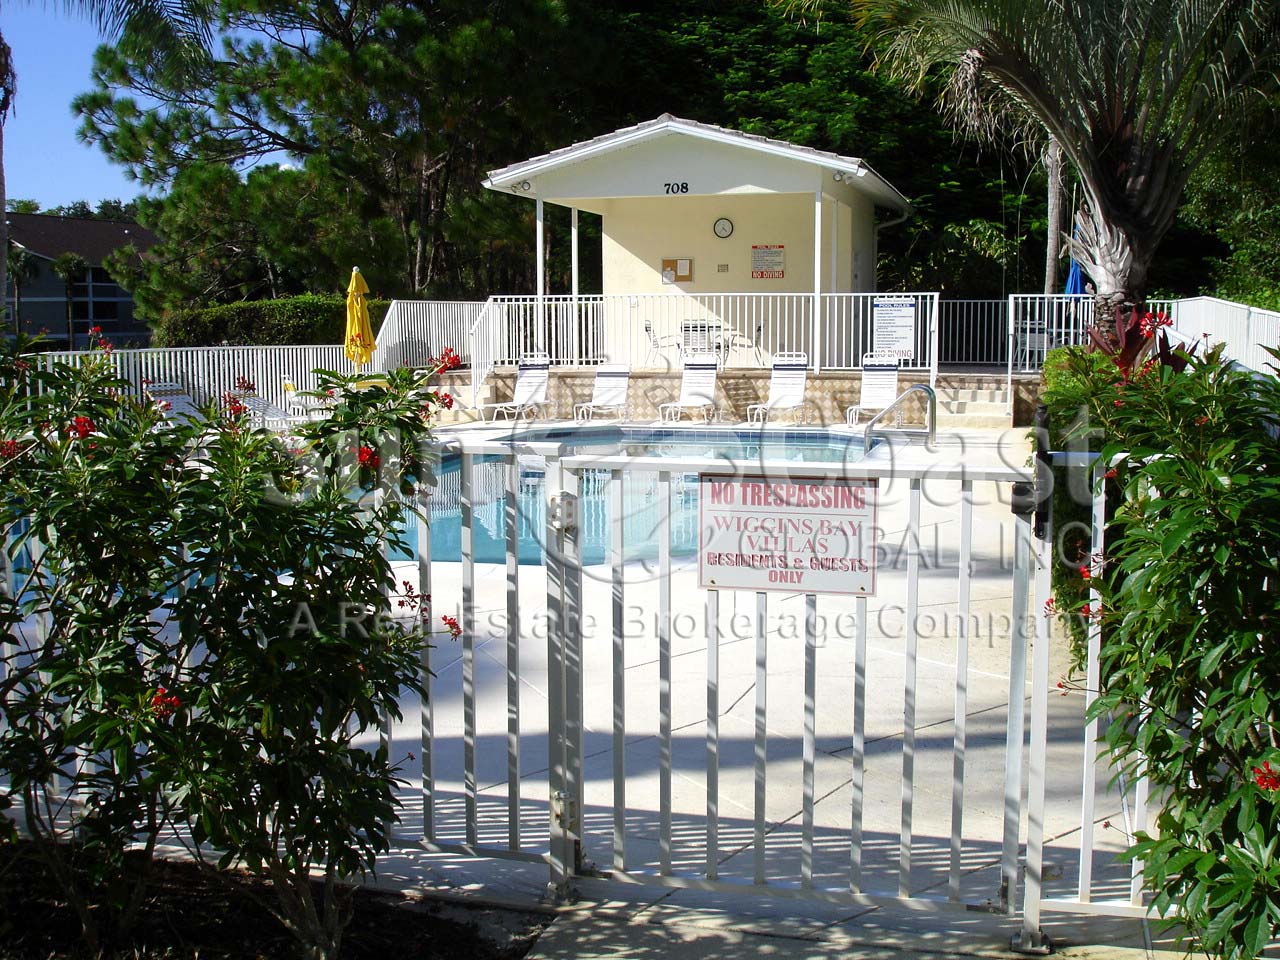 Wiggins Bay Villas Entrance to the Community Clubhouse and Pool 